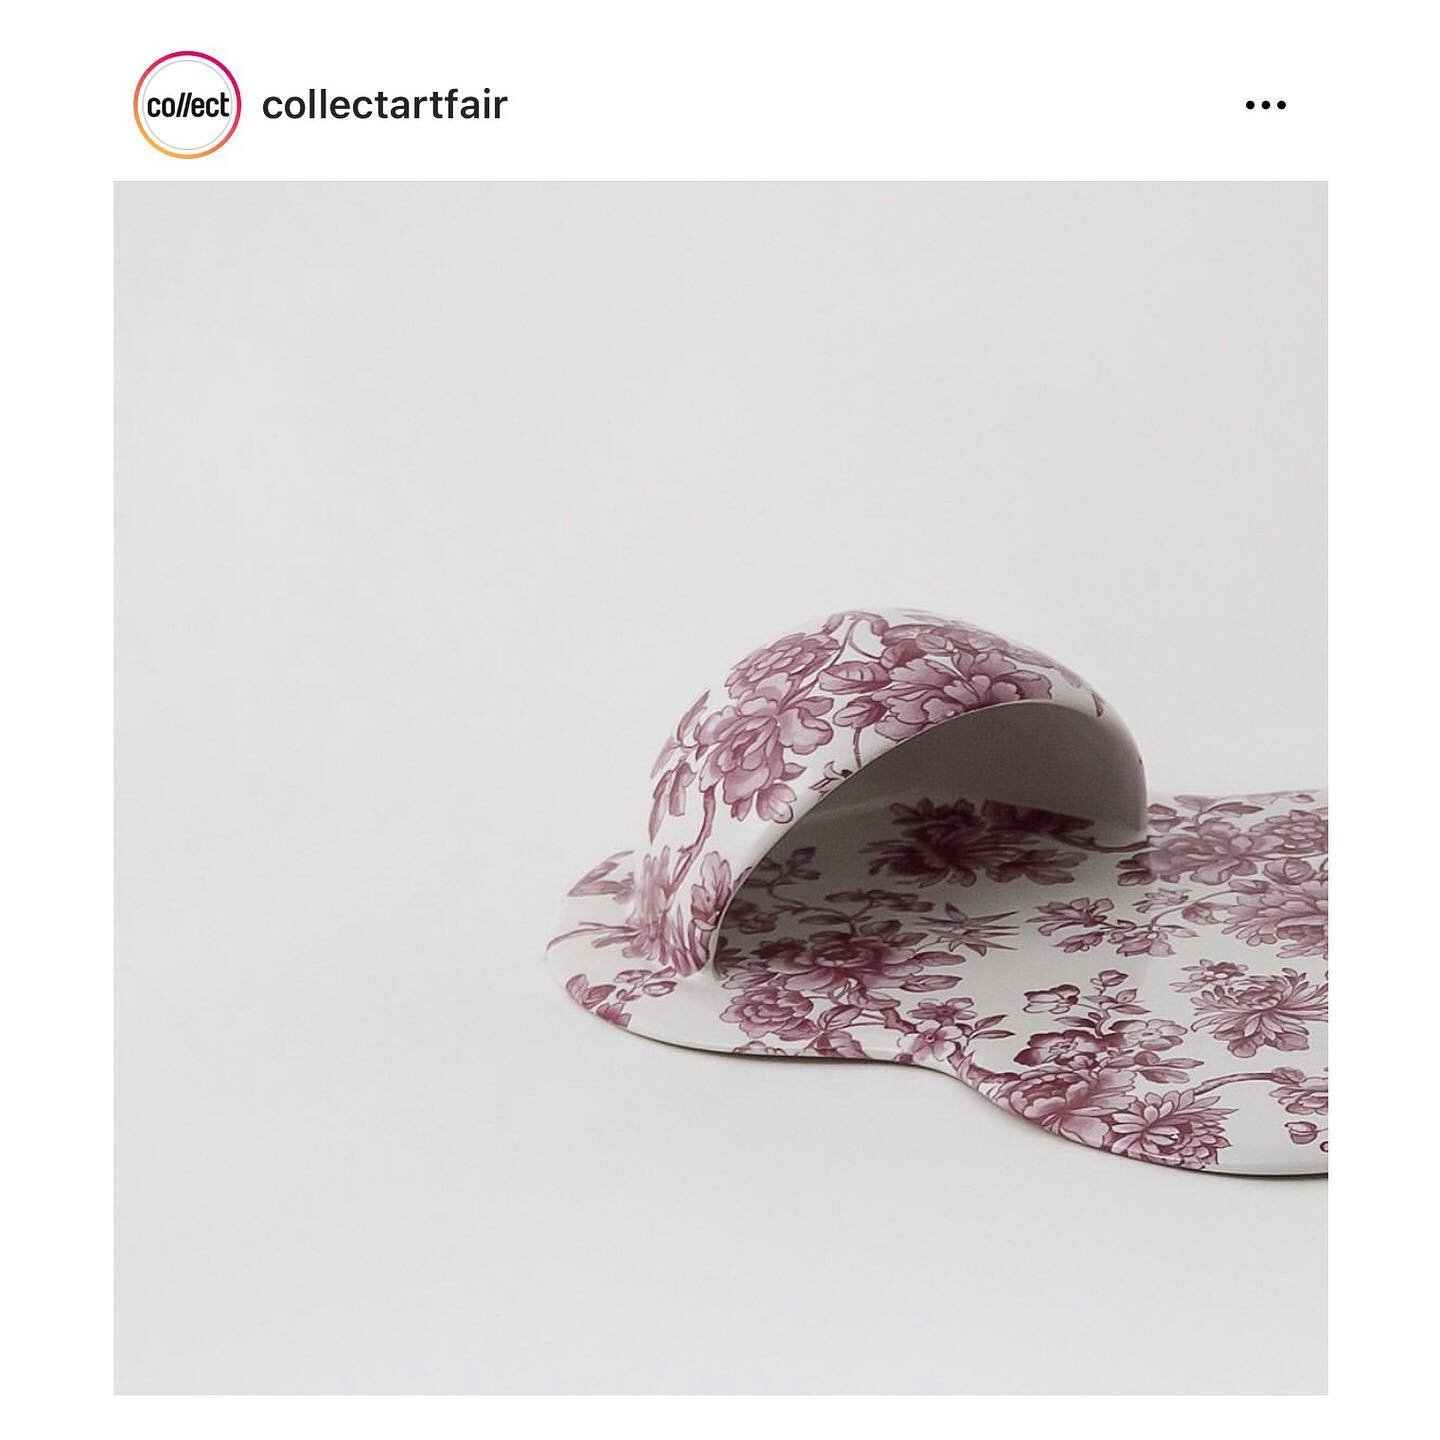 Hosted at the iconic @SomersetHouse, @CollectArtFair has always been an annual highlight for our cultural diary at Peach. Luckily, this year has been of no exception as @craftscouncil have partnered with @artsy to provide a virtual platform showcasin